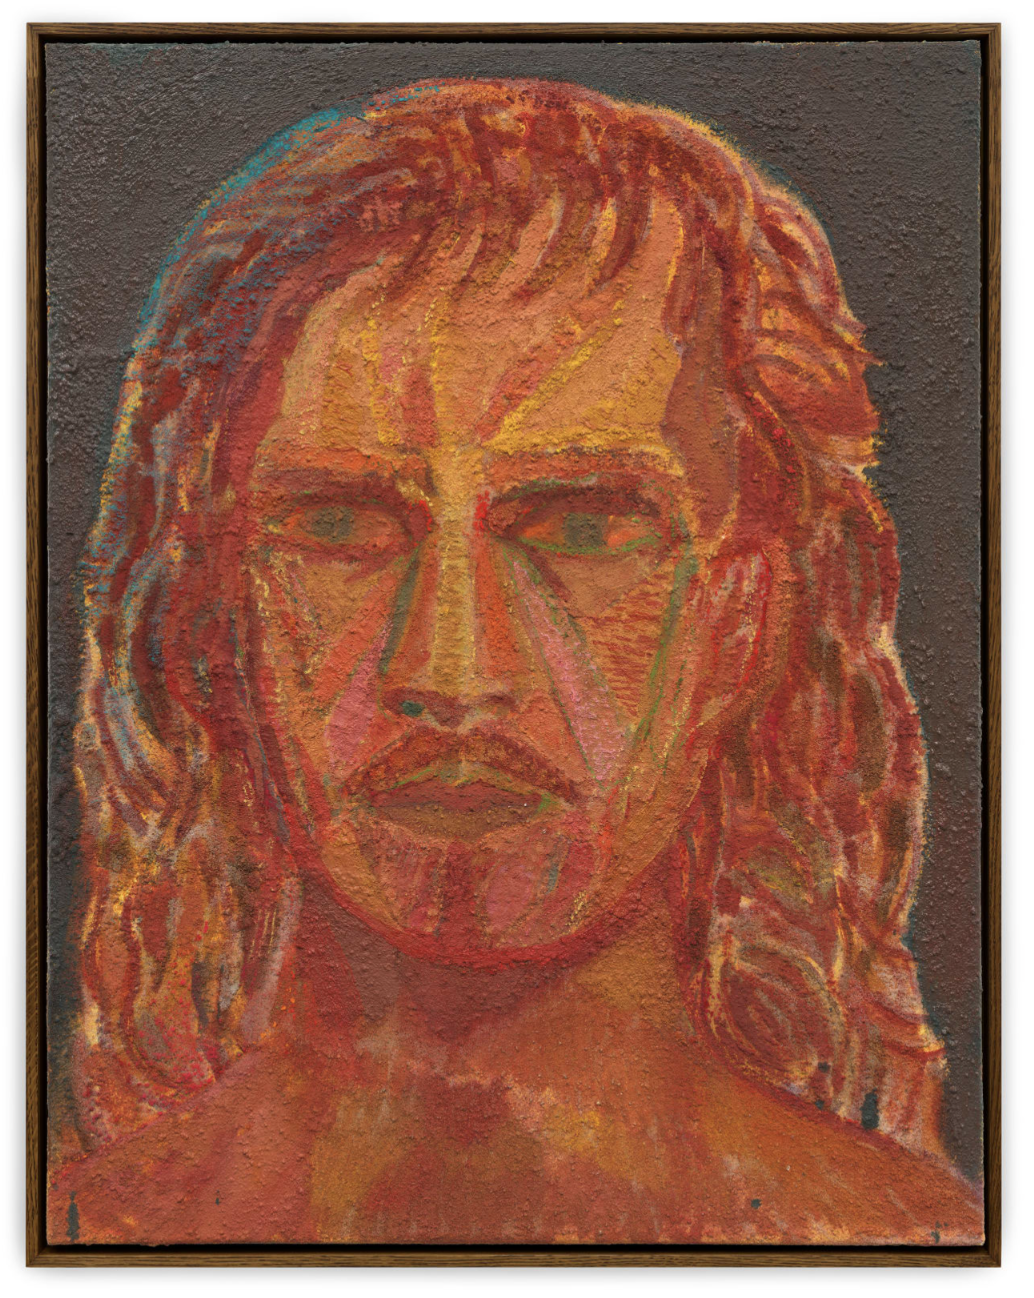    Man with Red Hair , 2023    Oil and sand on canvas    45.8 x 35.5cm (18 x 14in) Framed: 48.2 x 38cm (19 x 15in)  